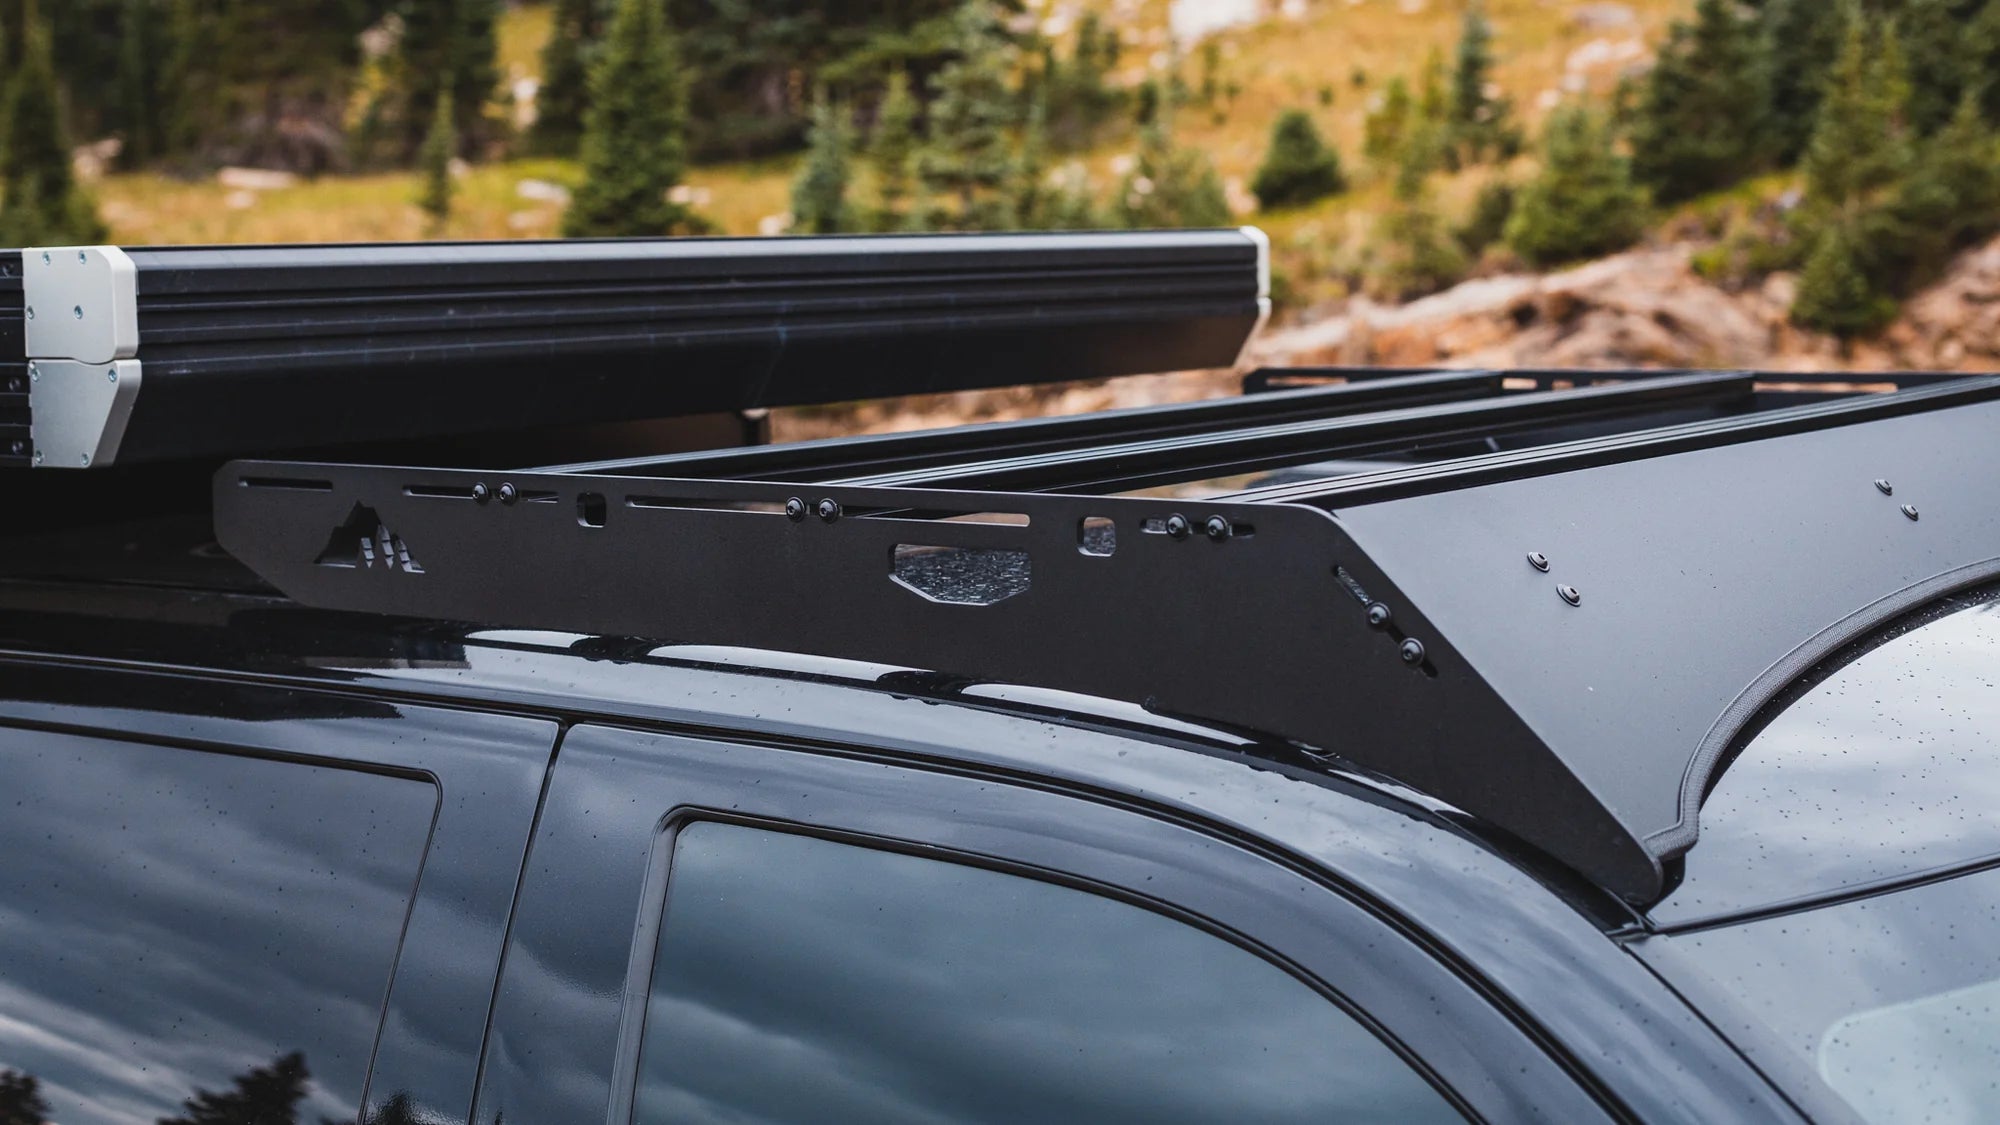 The Cub - Tundra Crewmax Camper Roof Rack 2022-2023 by Sherpa